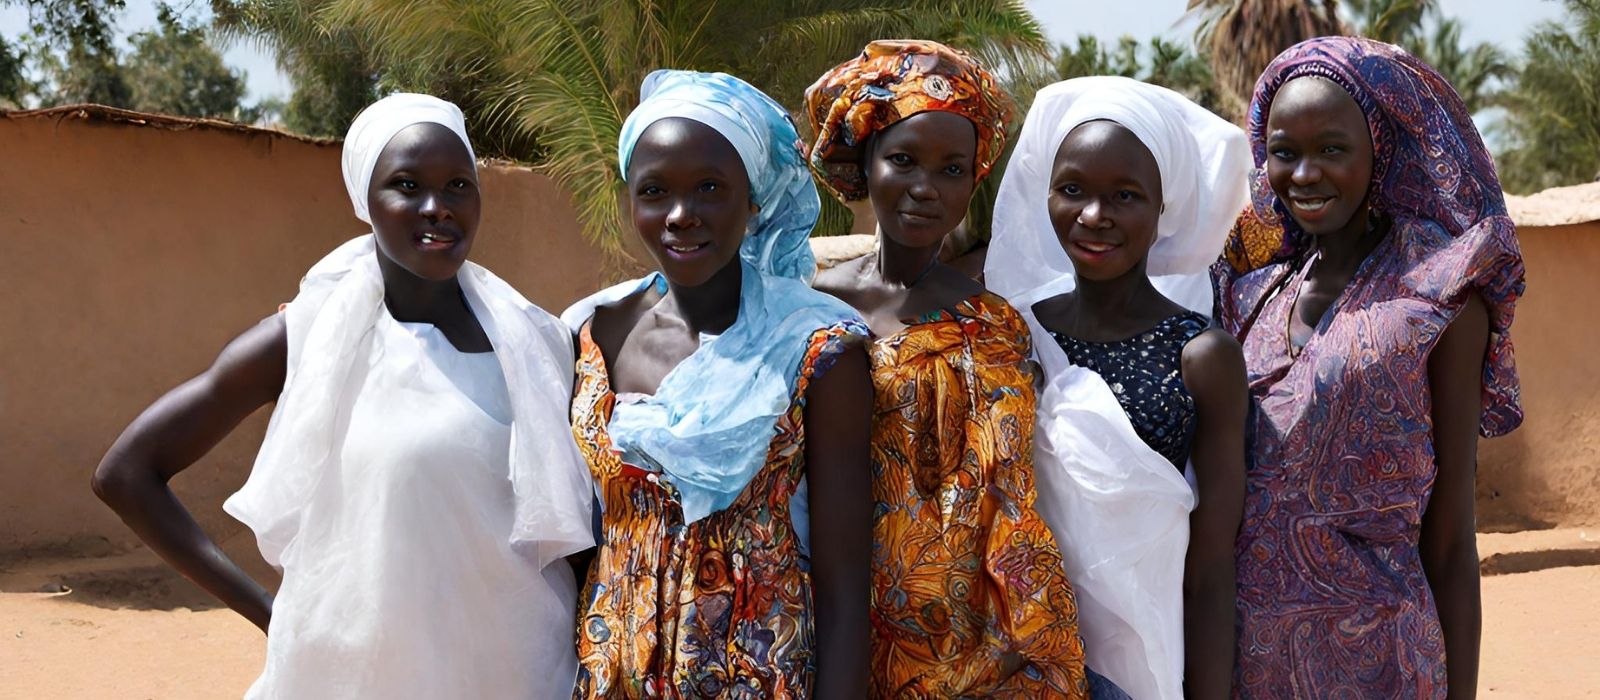 Gambia faces controversy over proposed reversal of female genital mutilation ban